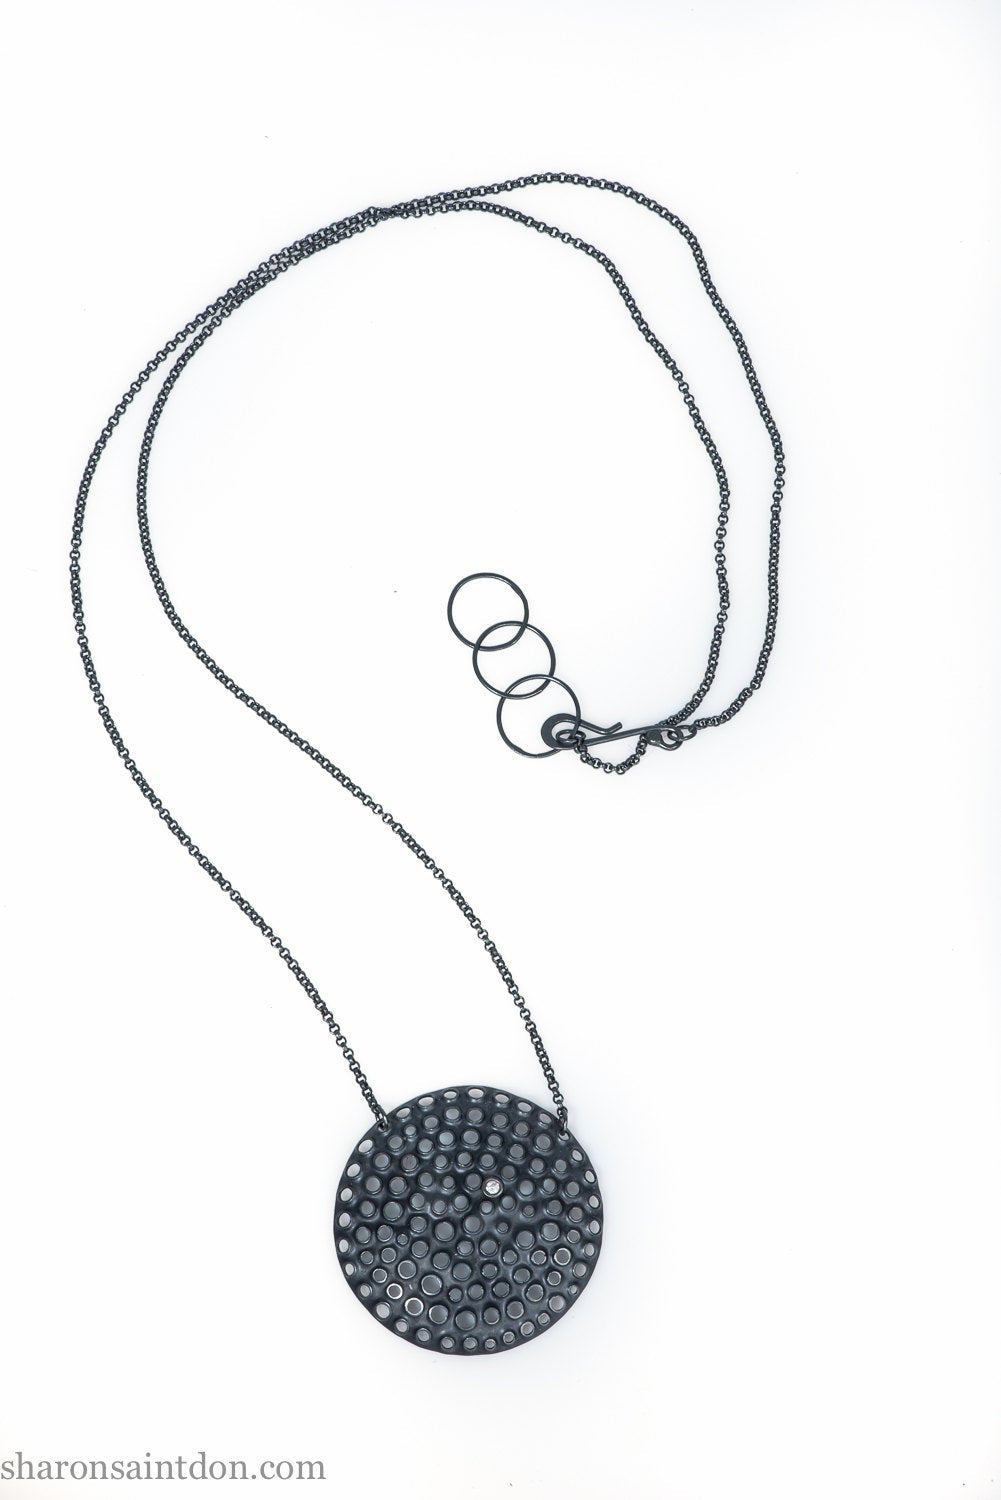 Handmade, large, 925 sterling silver pendant necklace by Sharon SaintDon. 50mm diameter round, covered in perforated holes, oxidized black with cubic zirconia gemstone. 36 or 18 inch black chain.